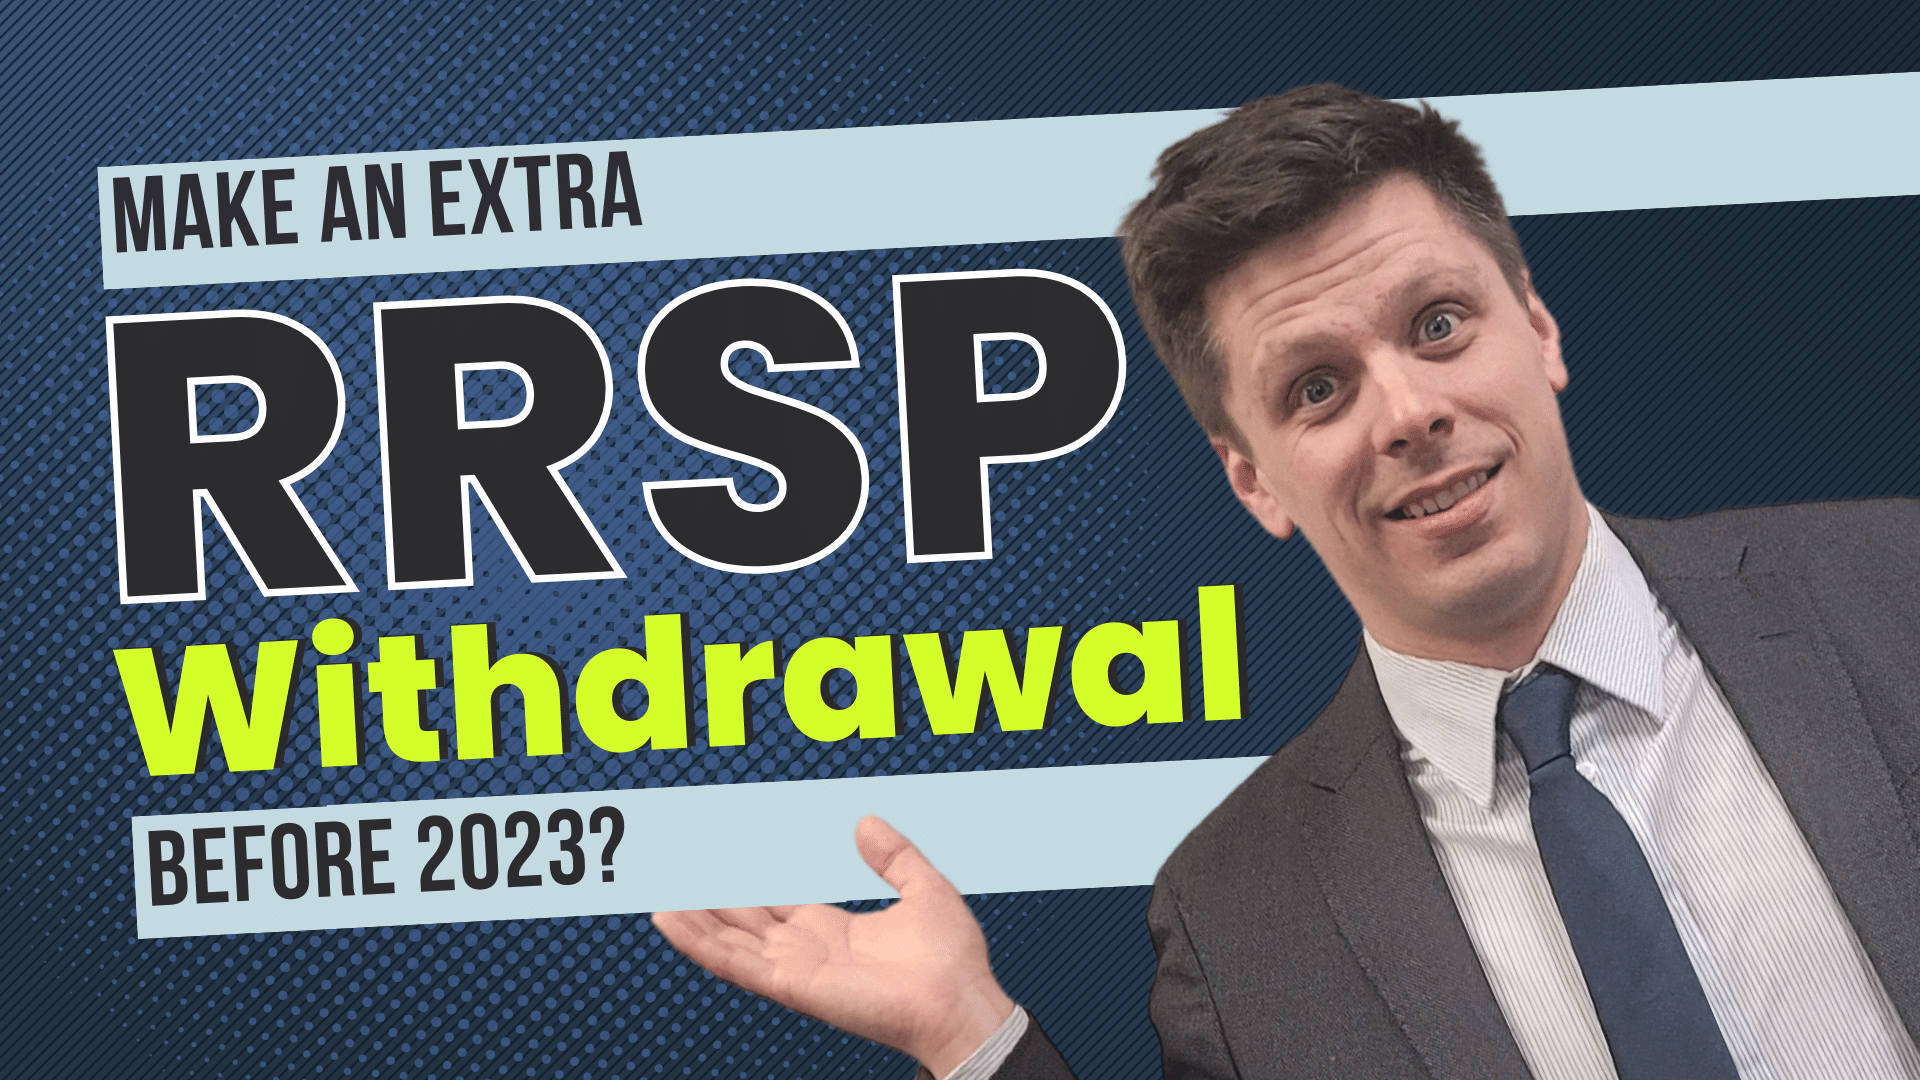 Extra RRSP Withdrawal